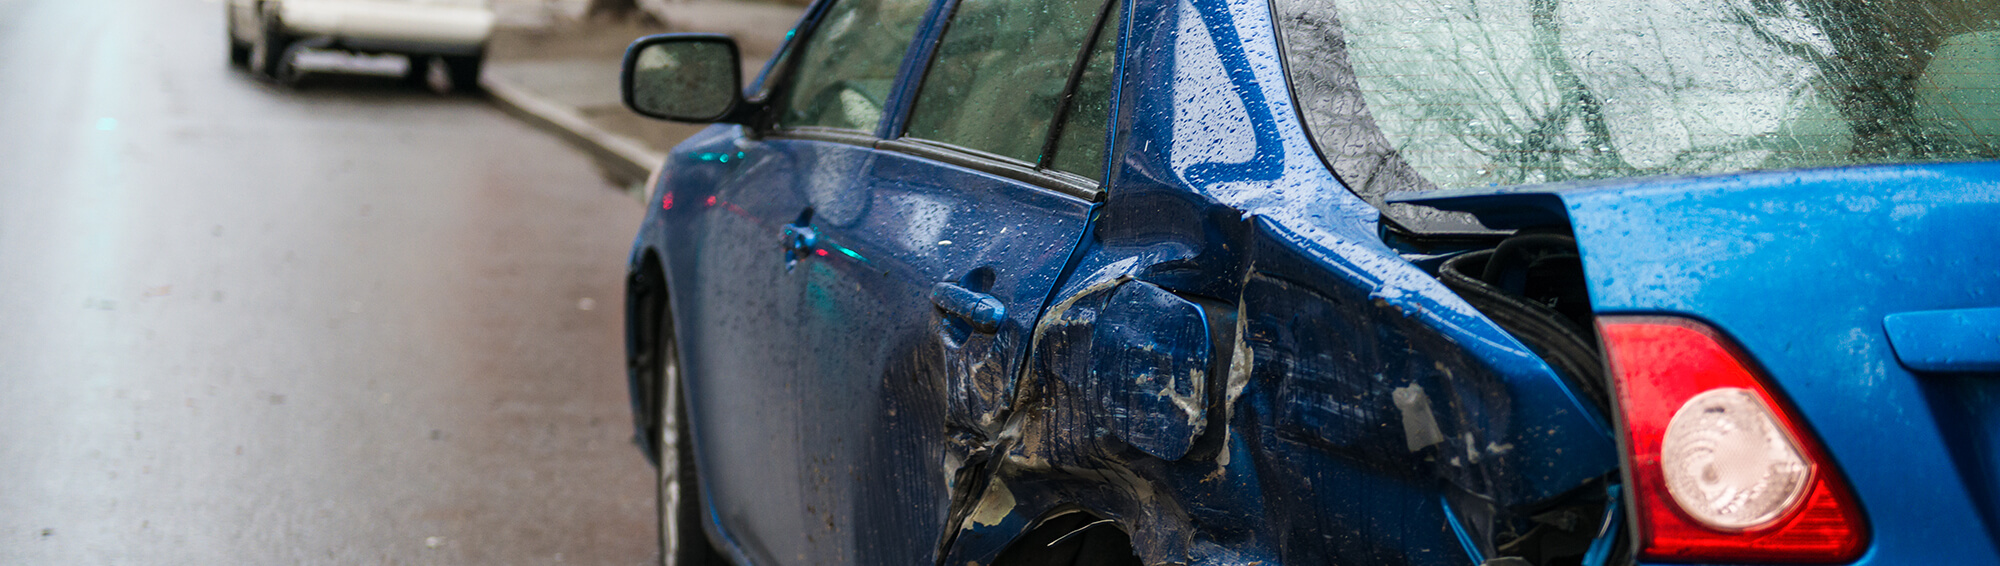 Injured in a Parking Lot? You May Be Eligible for Compensation.